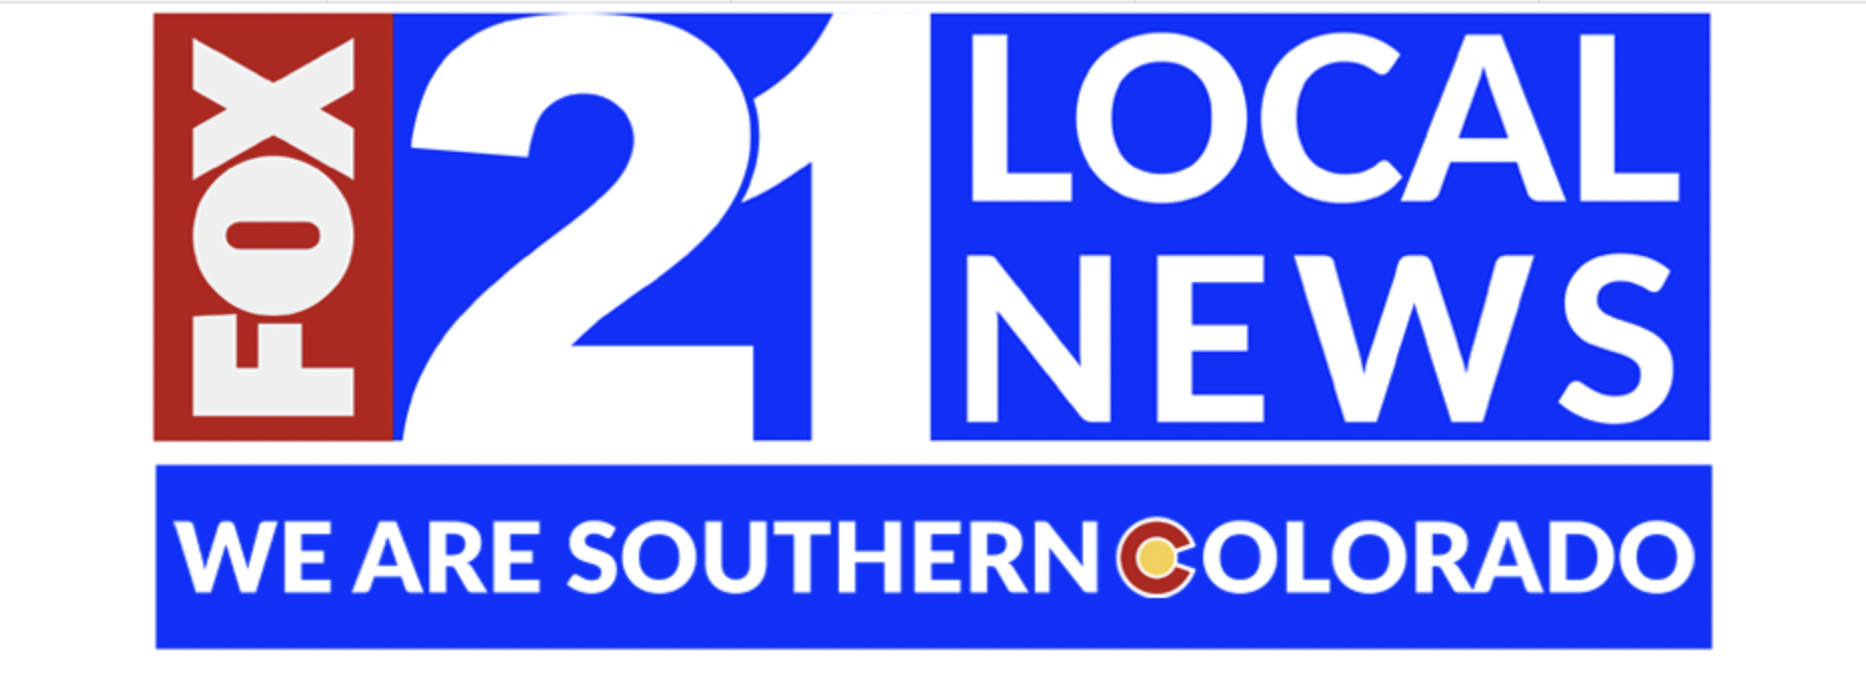 The Simple Sort Home Organizing icompany in Colorado Springs has been featured on Fox 21 news in Colorado Springs 